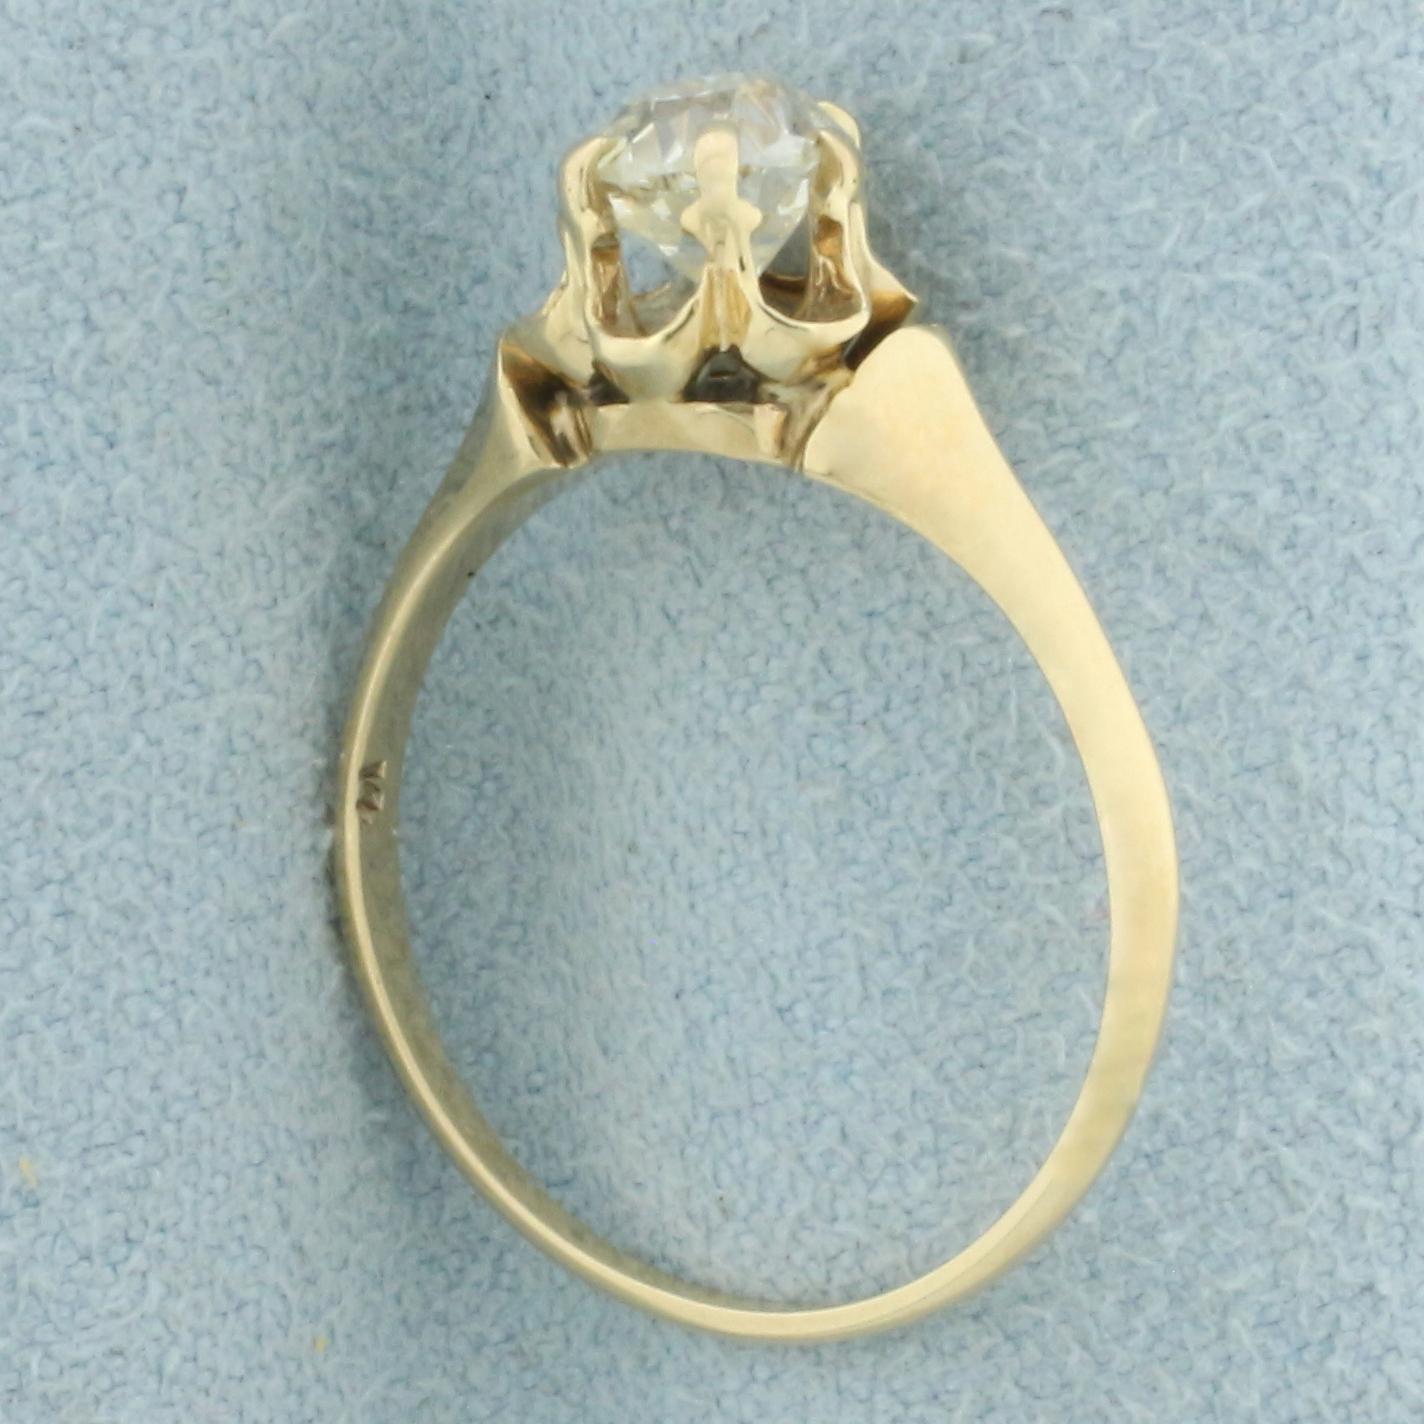 Antique 3/4ct Old Mine Cut Diamond Solitaire Engagement Ring In 14k Yellow Gold